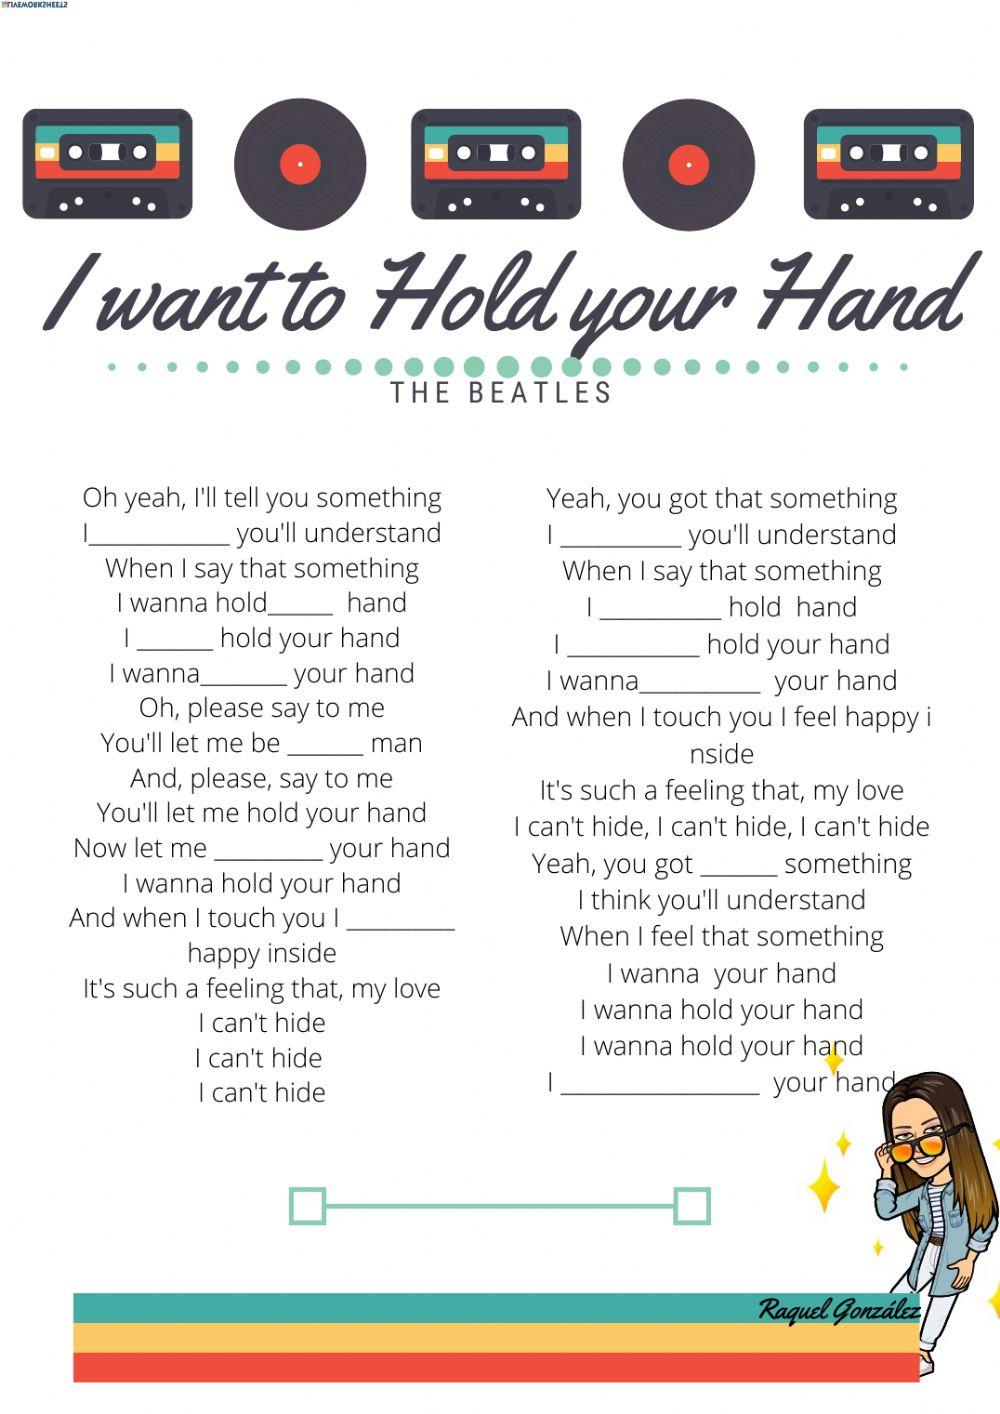 I wanna hold your hand, The Beatles